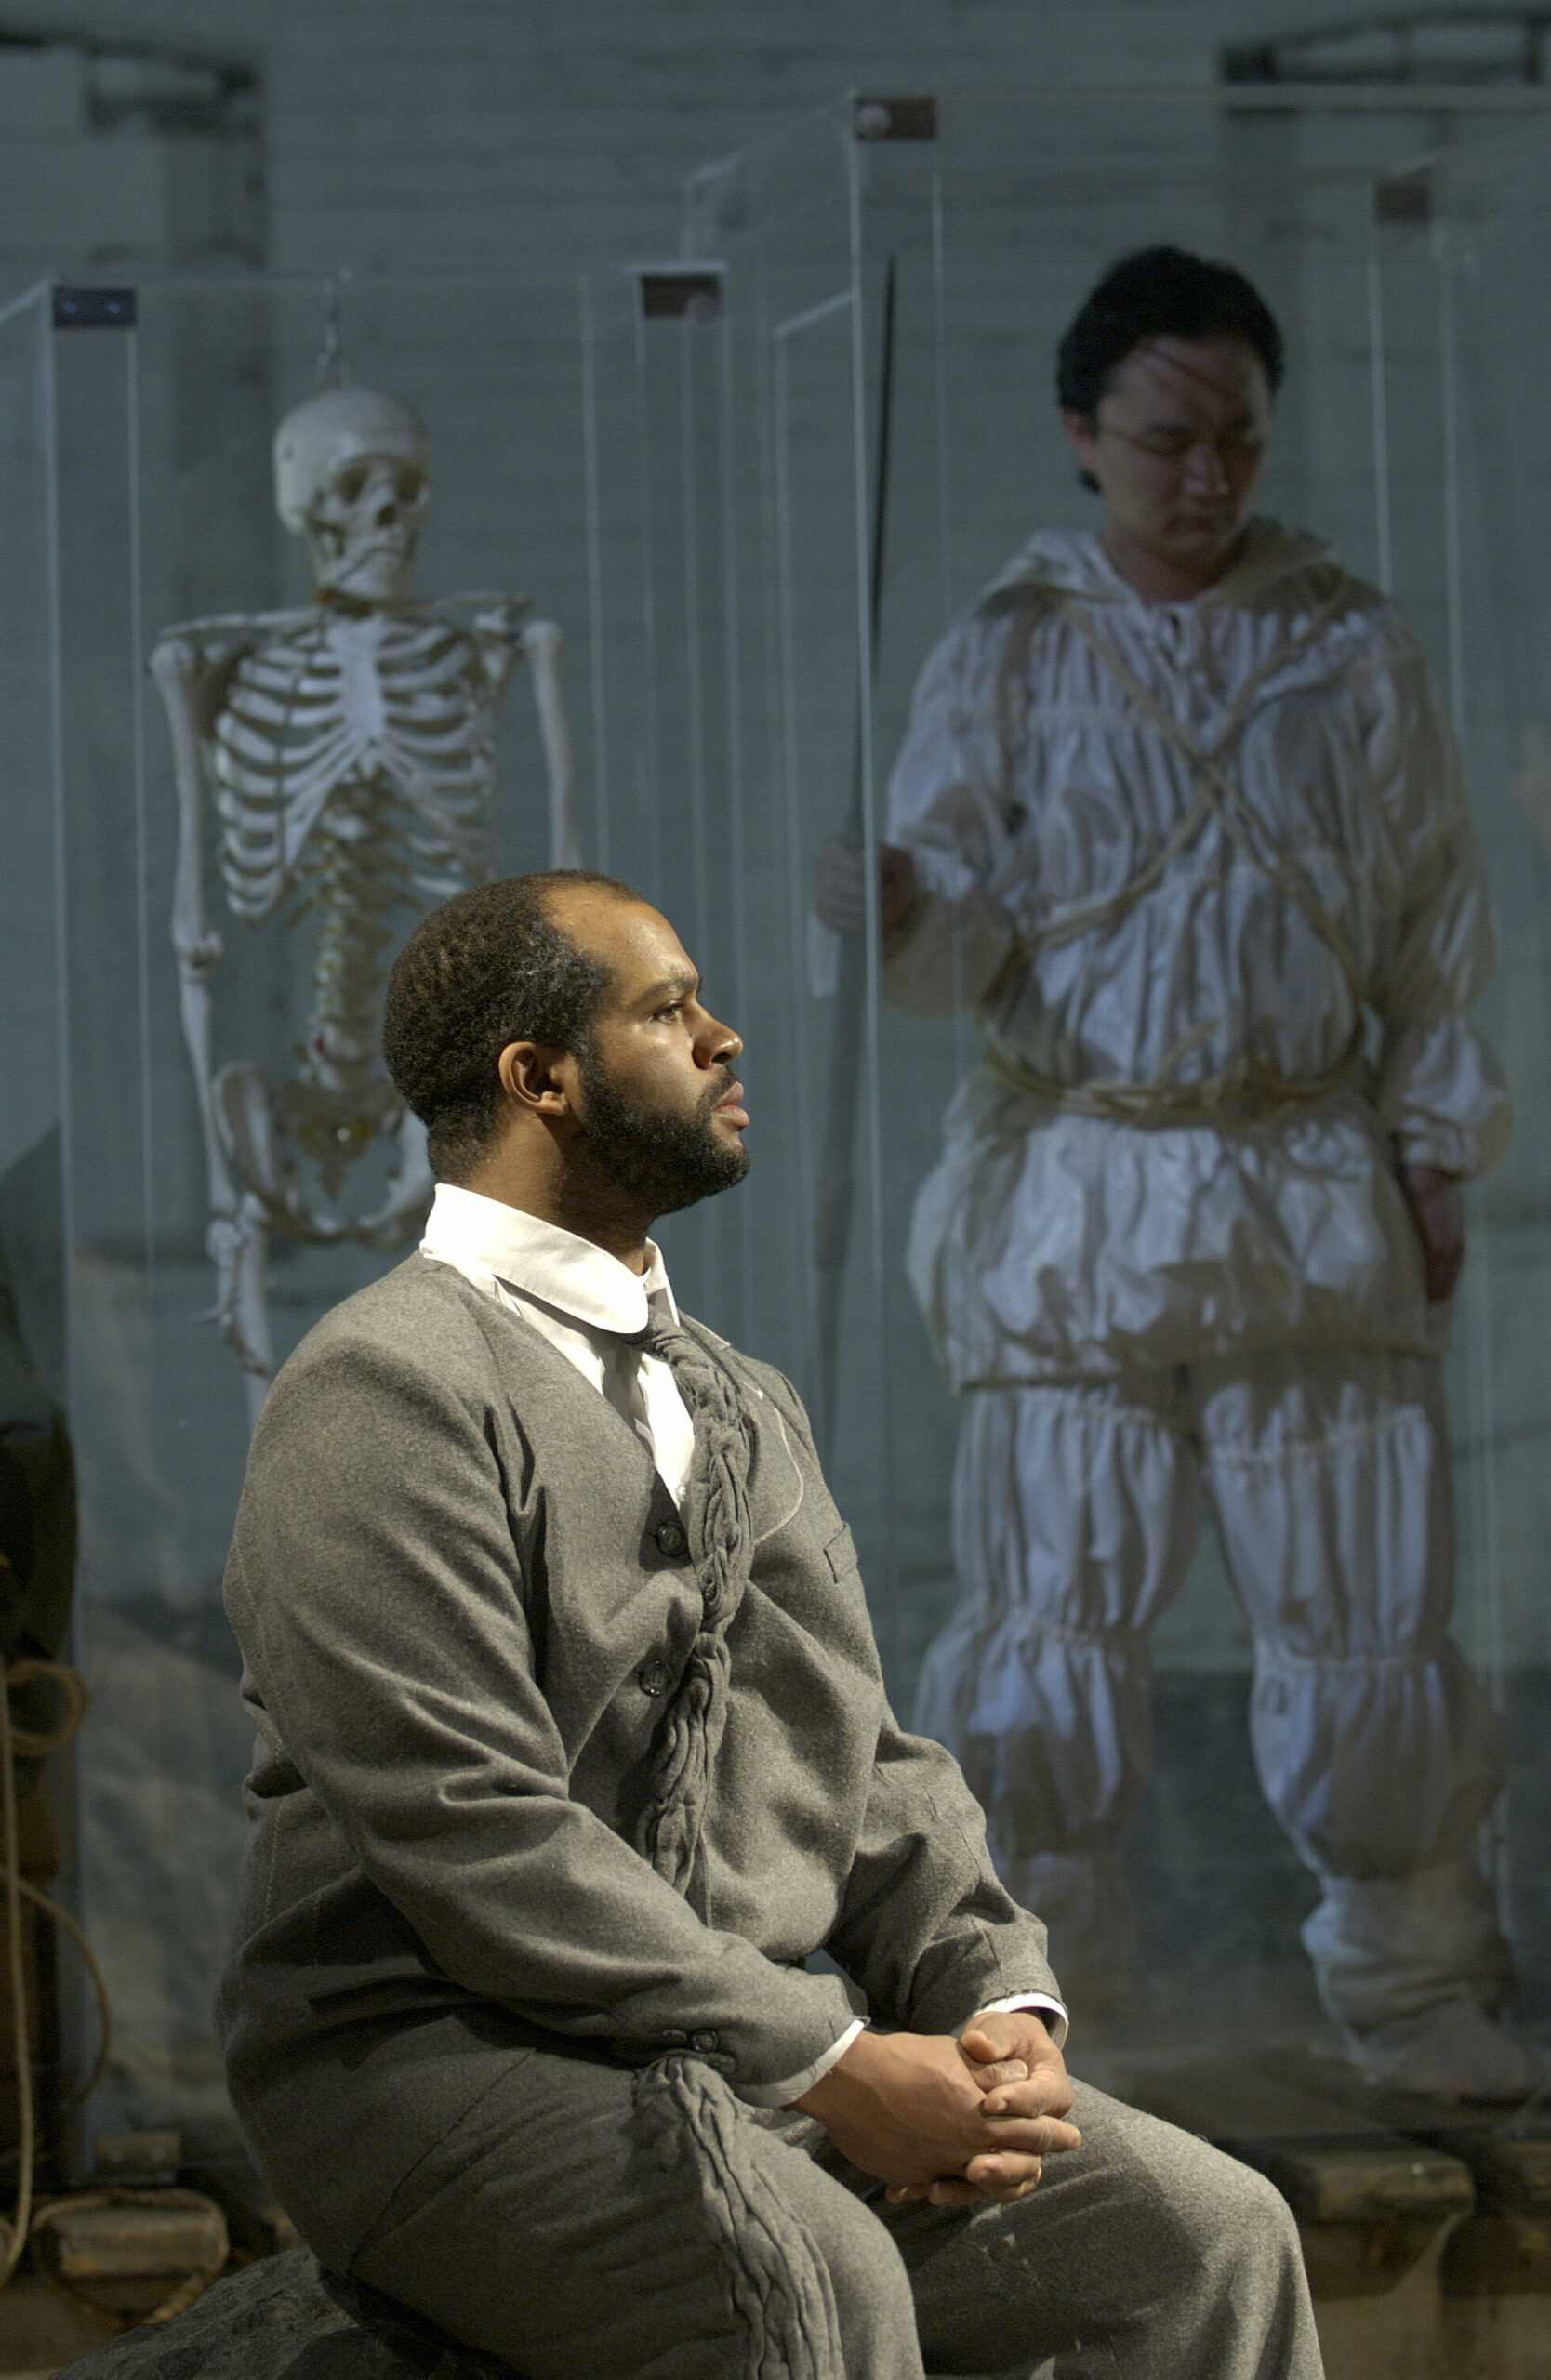 A Black man wearing a grey wool suit sits and looks off to the right. In the background, dimly lit, is a skeleton and a man wearing an outfit of crumpled white fabric.